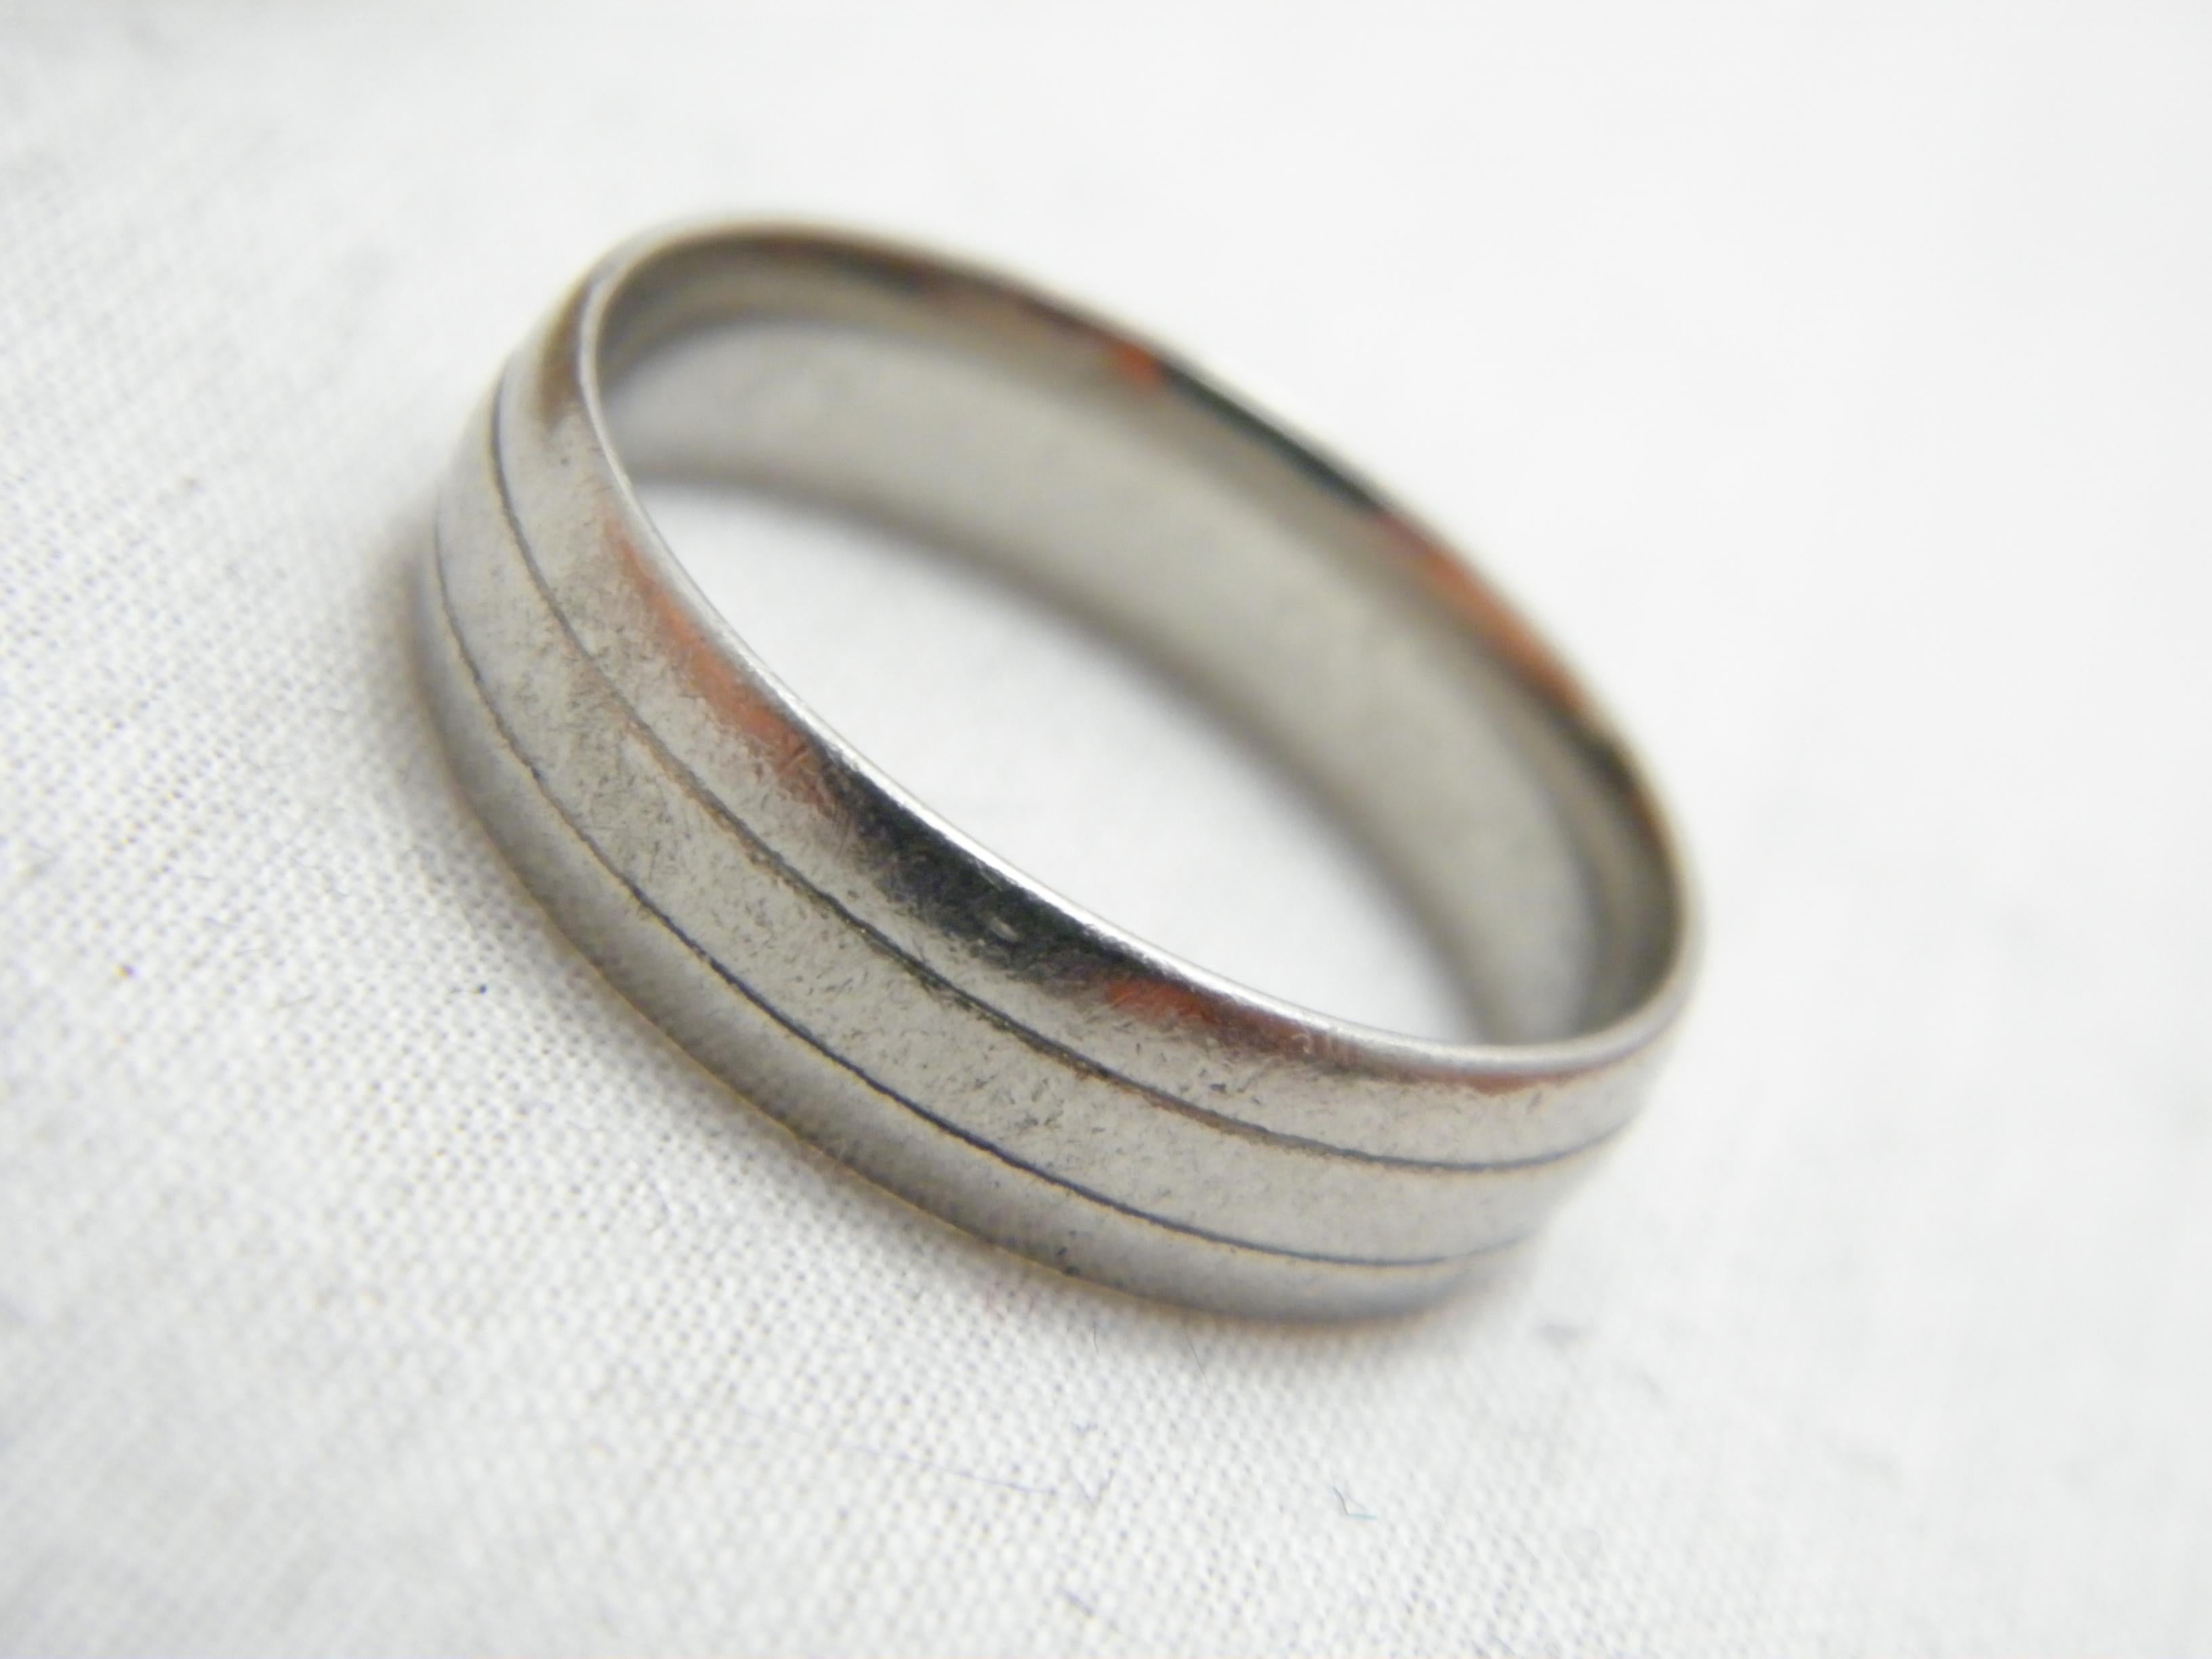 If you have landed on this page then you have an eye for beauty.

On offer is this gorgeous
VINTAGE PALLADIUM BEVELLED BURNSIHED WEDDING BAND RING

Crafted from solid Palladium (950/000)
and bespoke assay marked in London, UK dating to late 20th
It